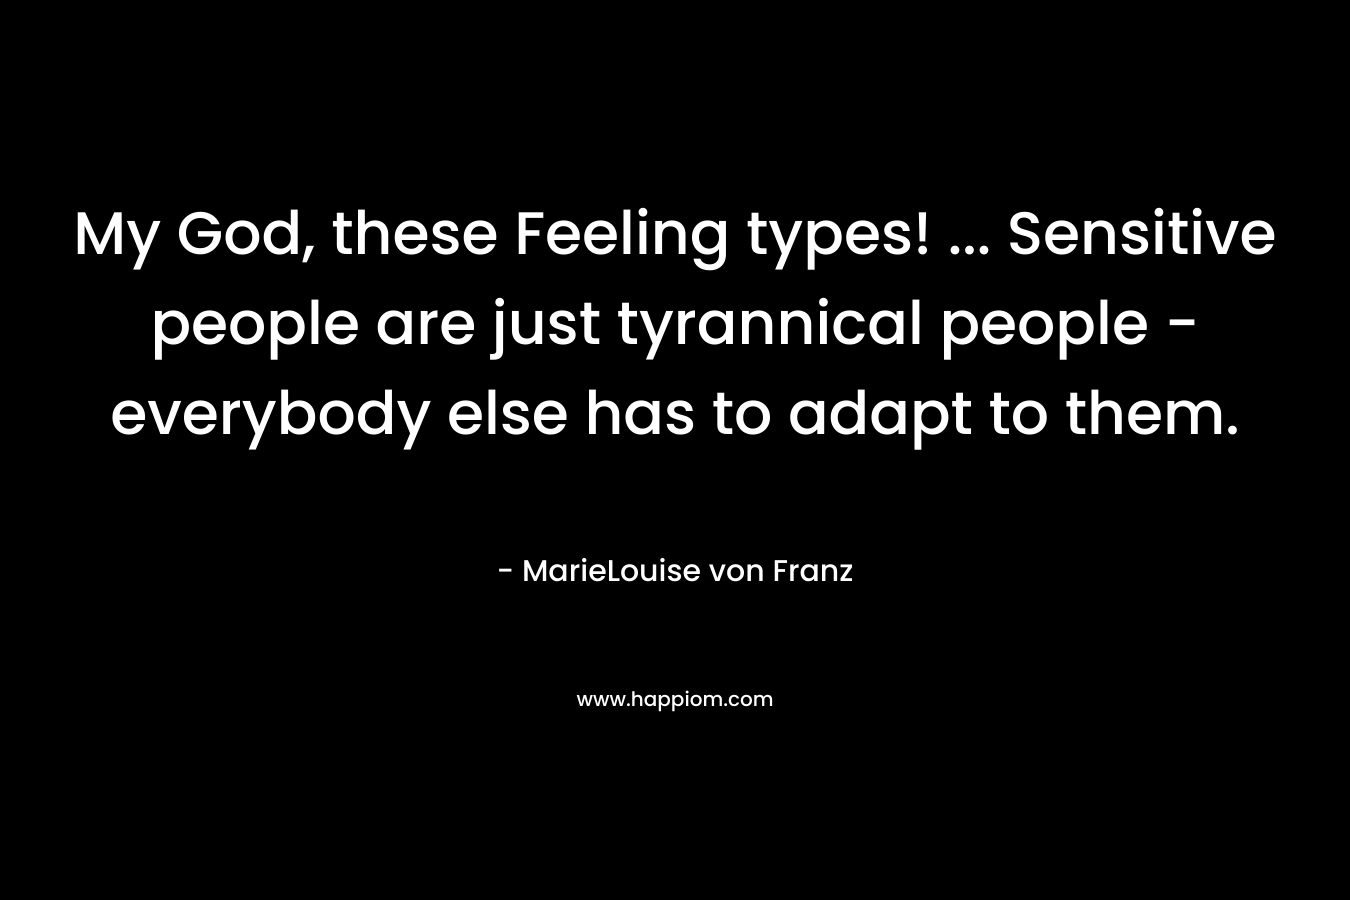 My God, these Feeling types! ... Sensitive people are just tyrannical people - everybody else has to adapt to them.